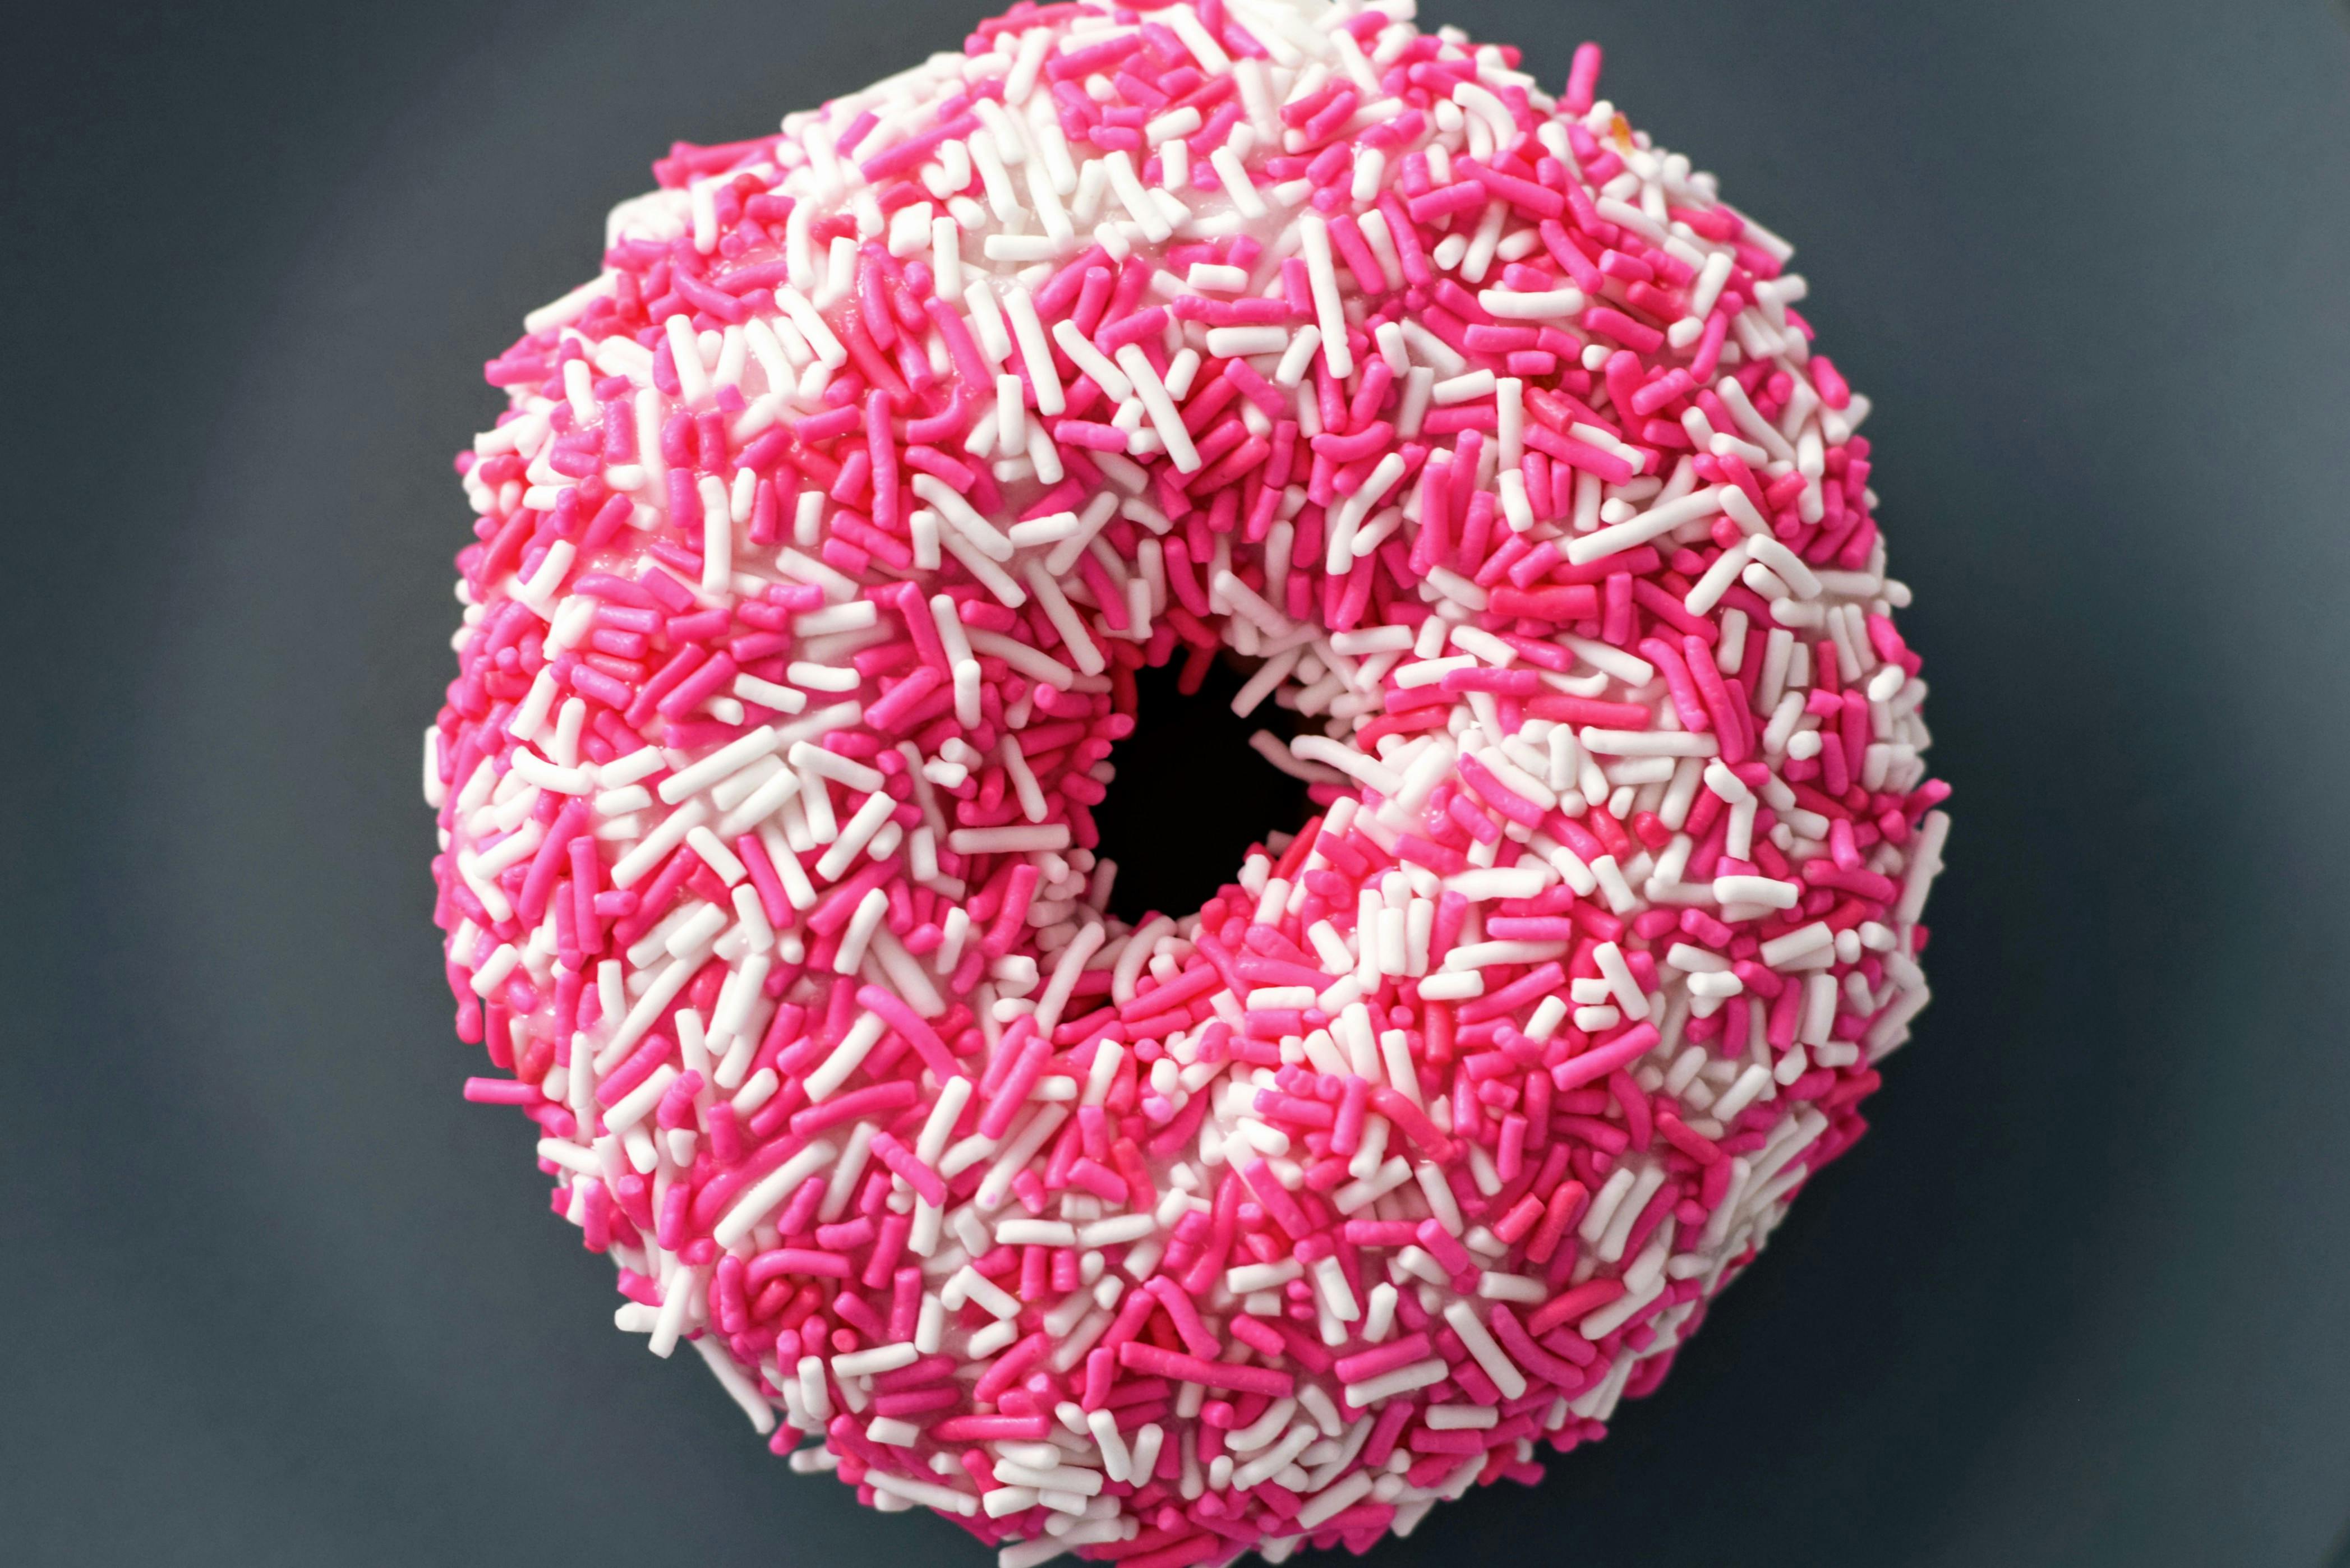 pink donut with sprinkles